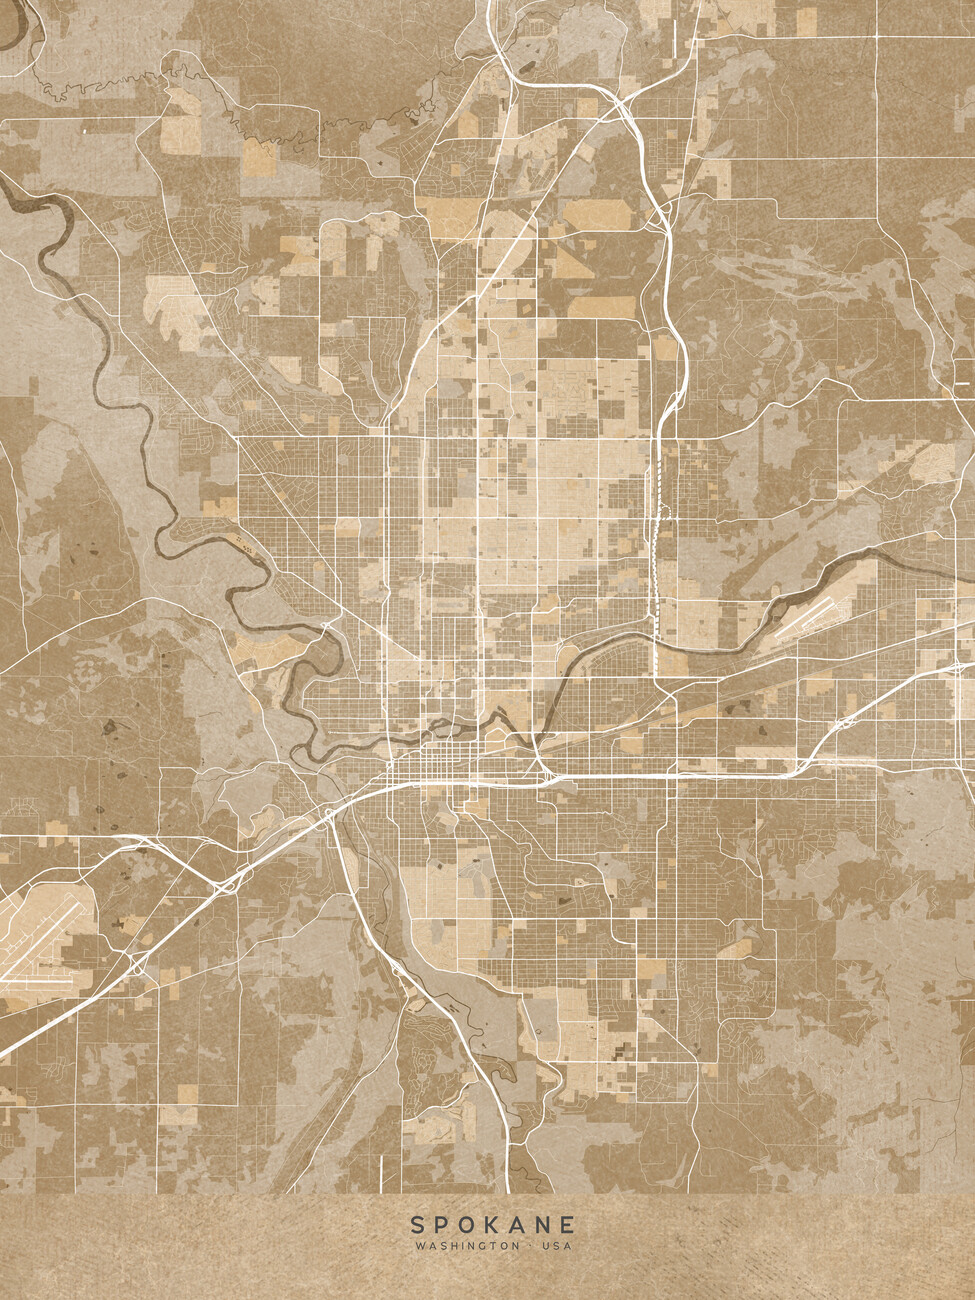 Map of Map of Spokane (WA, USA) in sepia vintage style ǀ Maps of all cities and countries for your wall